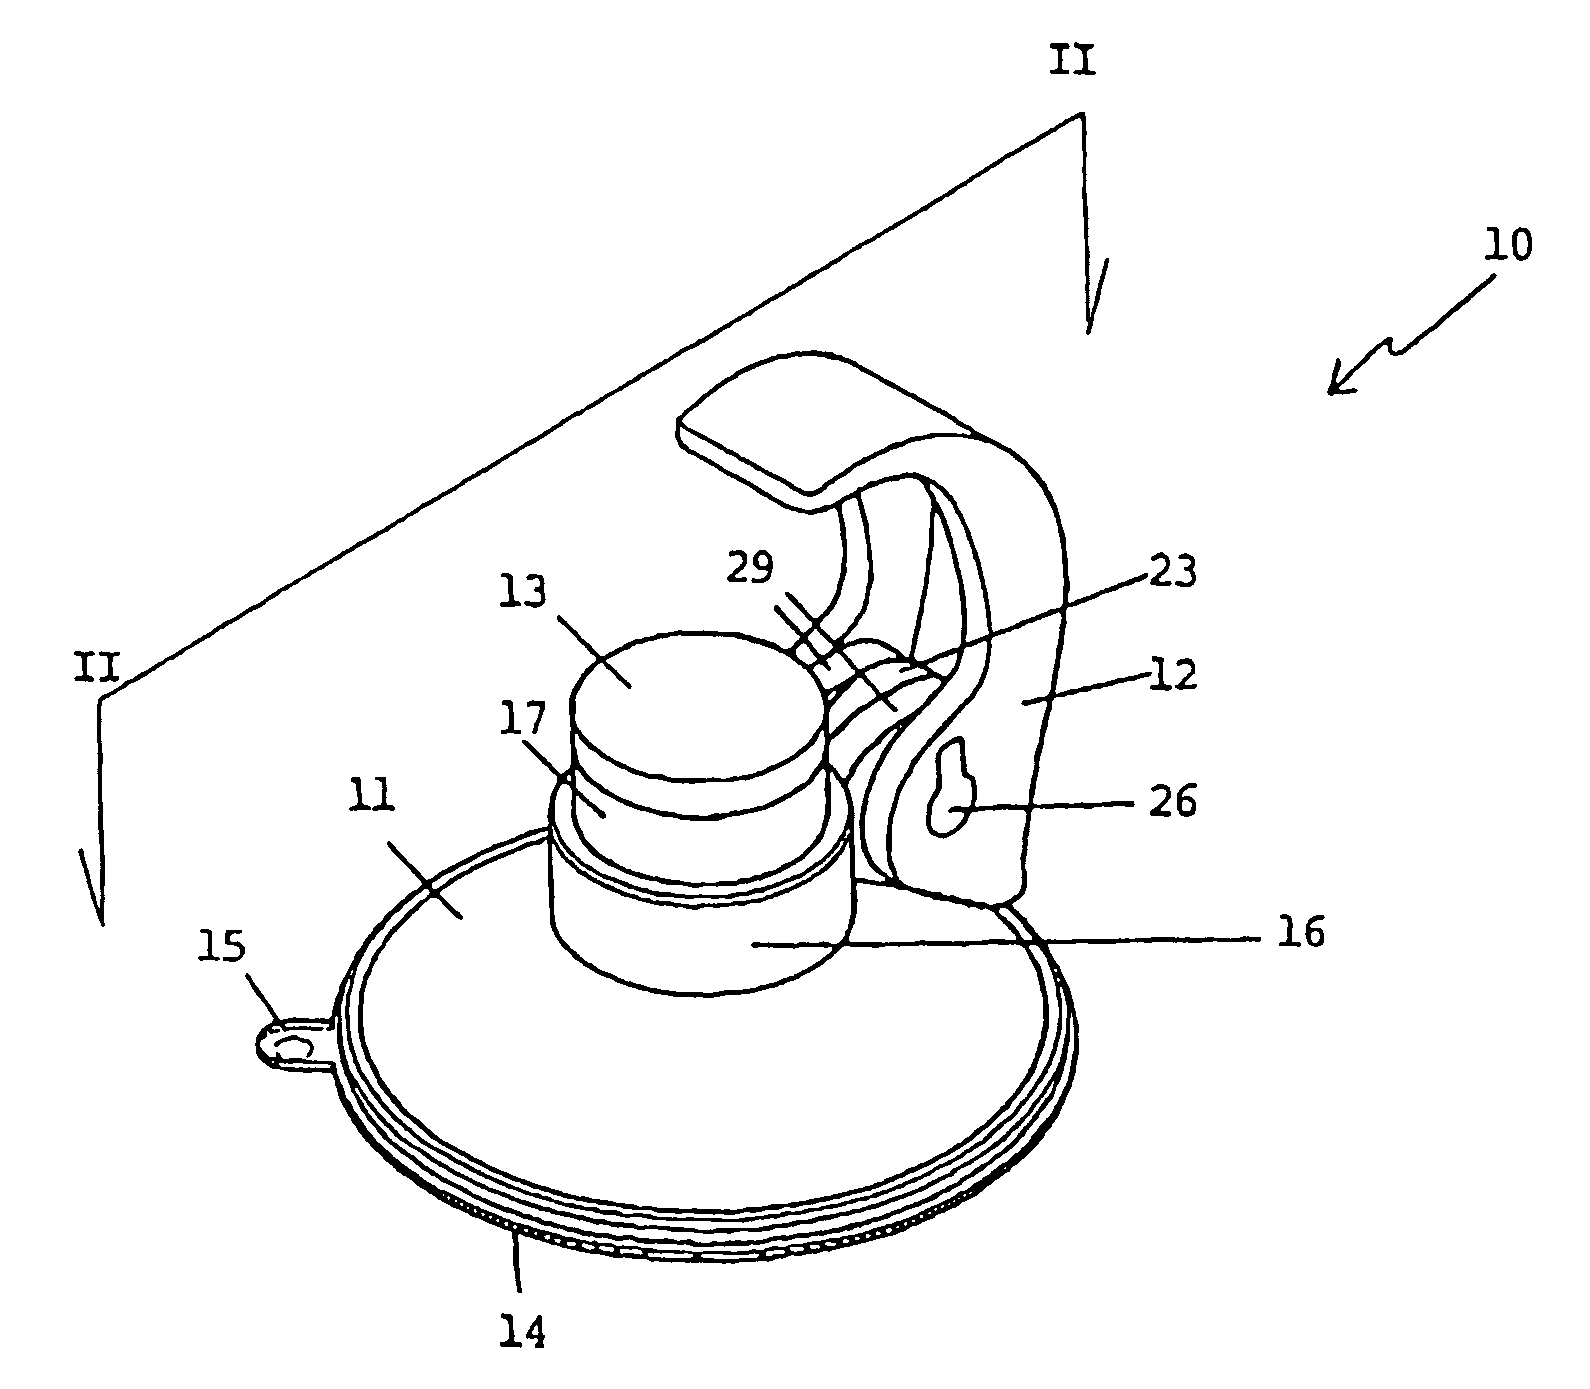 Suction-adhesive device